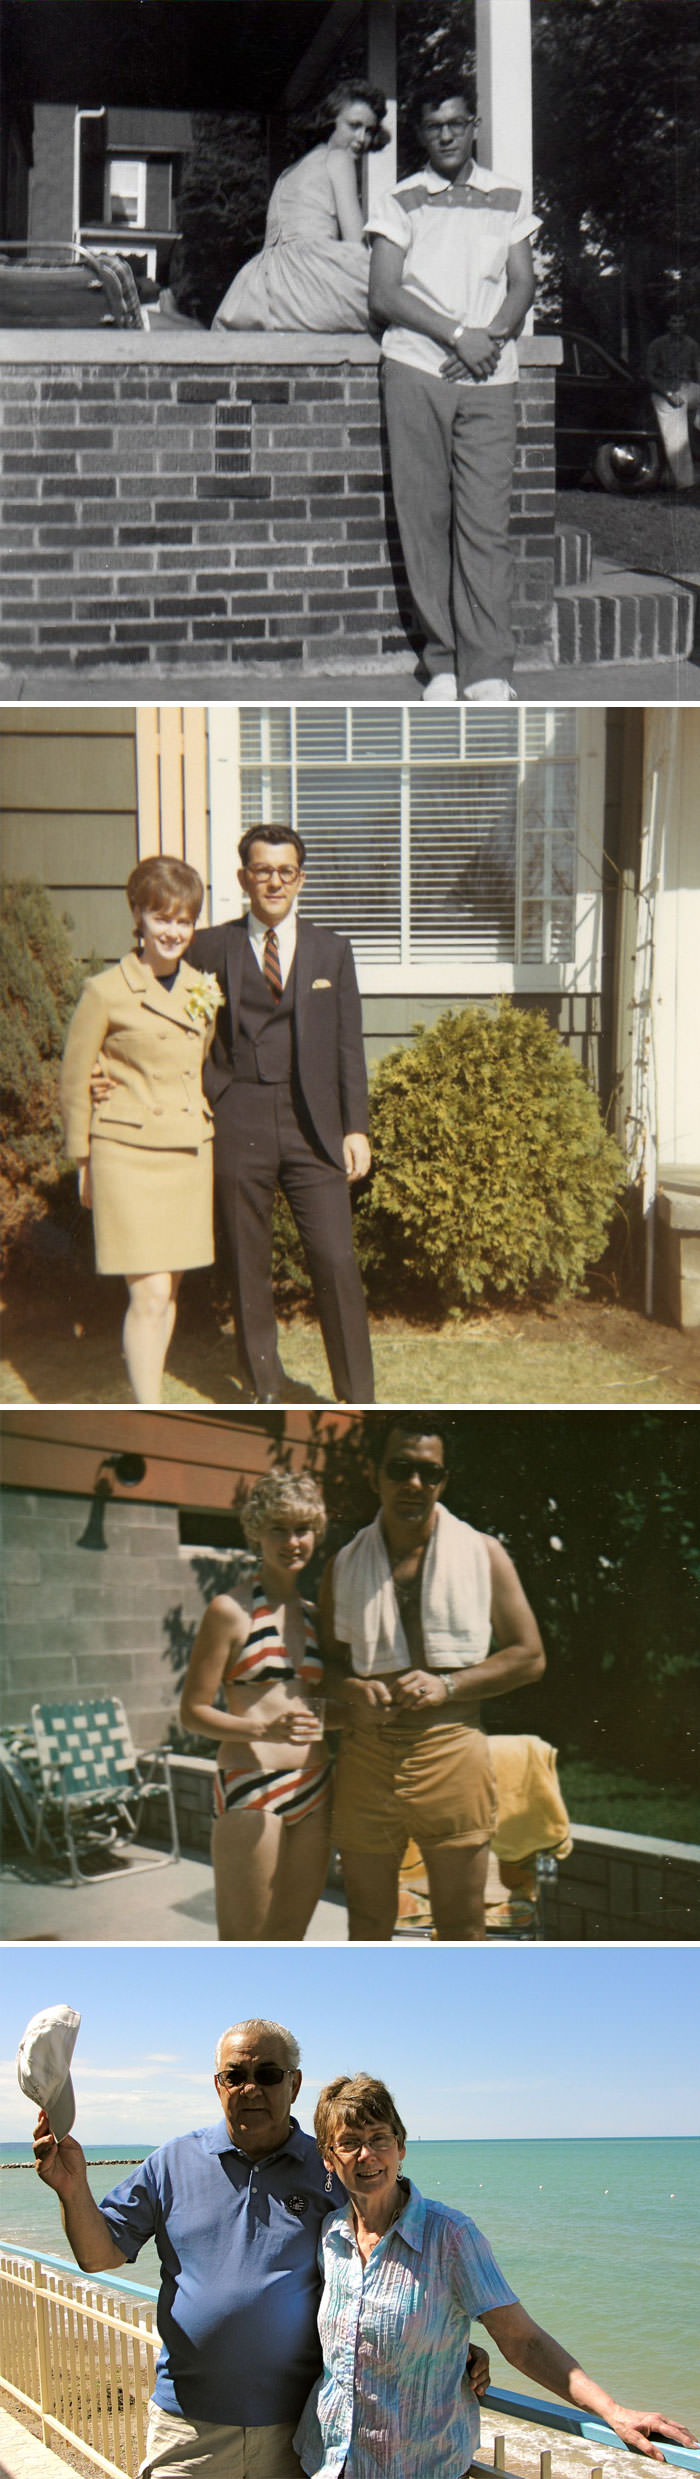 A married couple in the 50s, 60s, 70s, and today